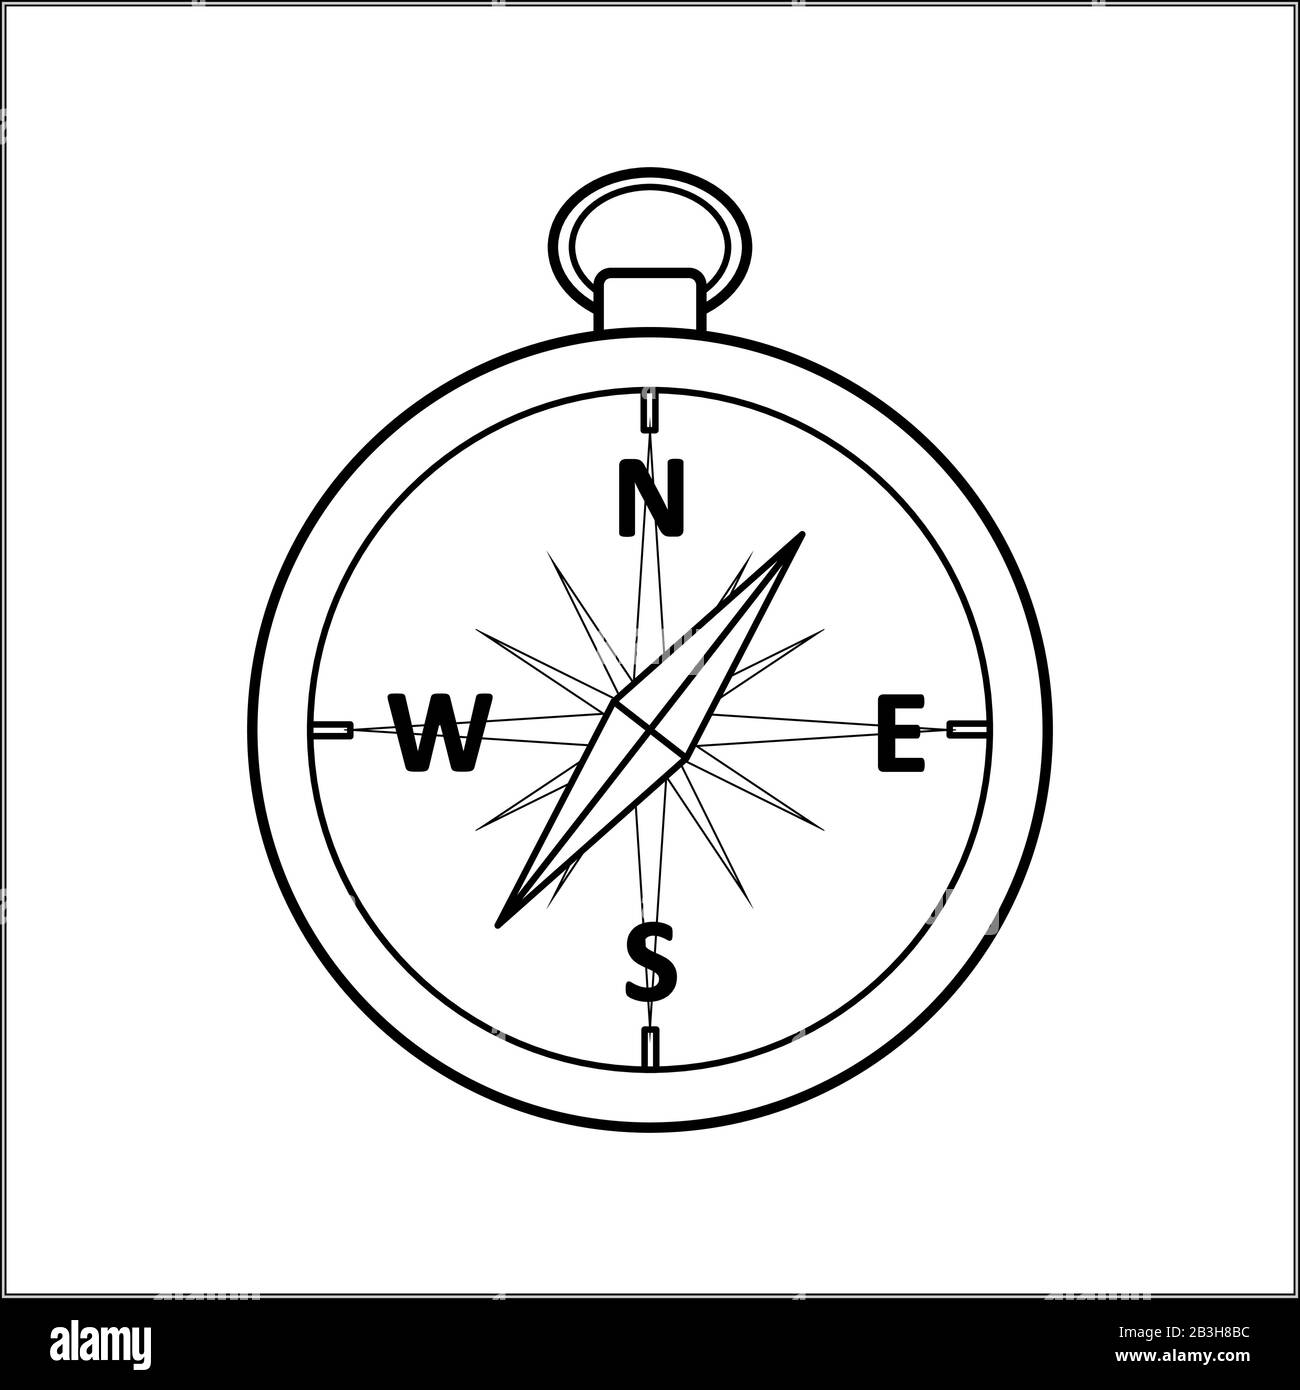 Vector Outline Compass For Children's Coloring Book. For coloring. Stock Vector